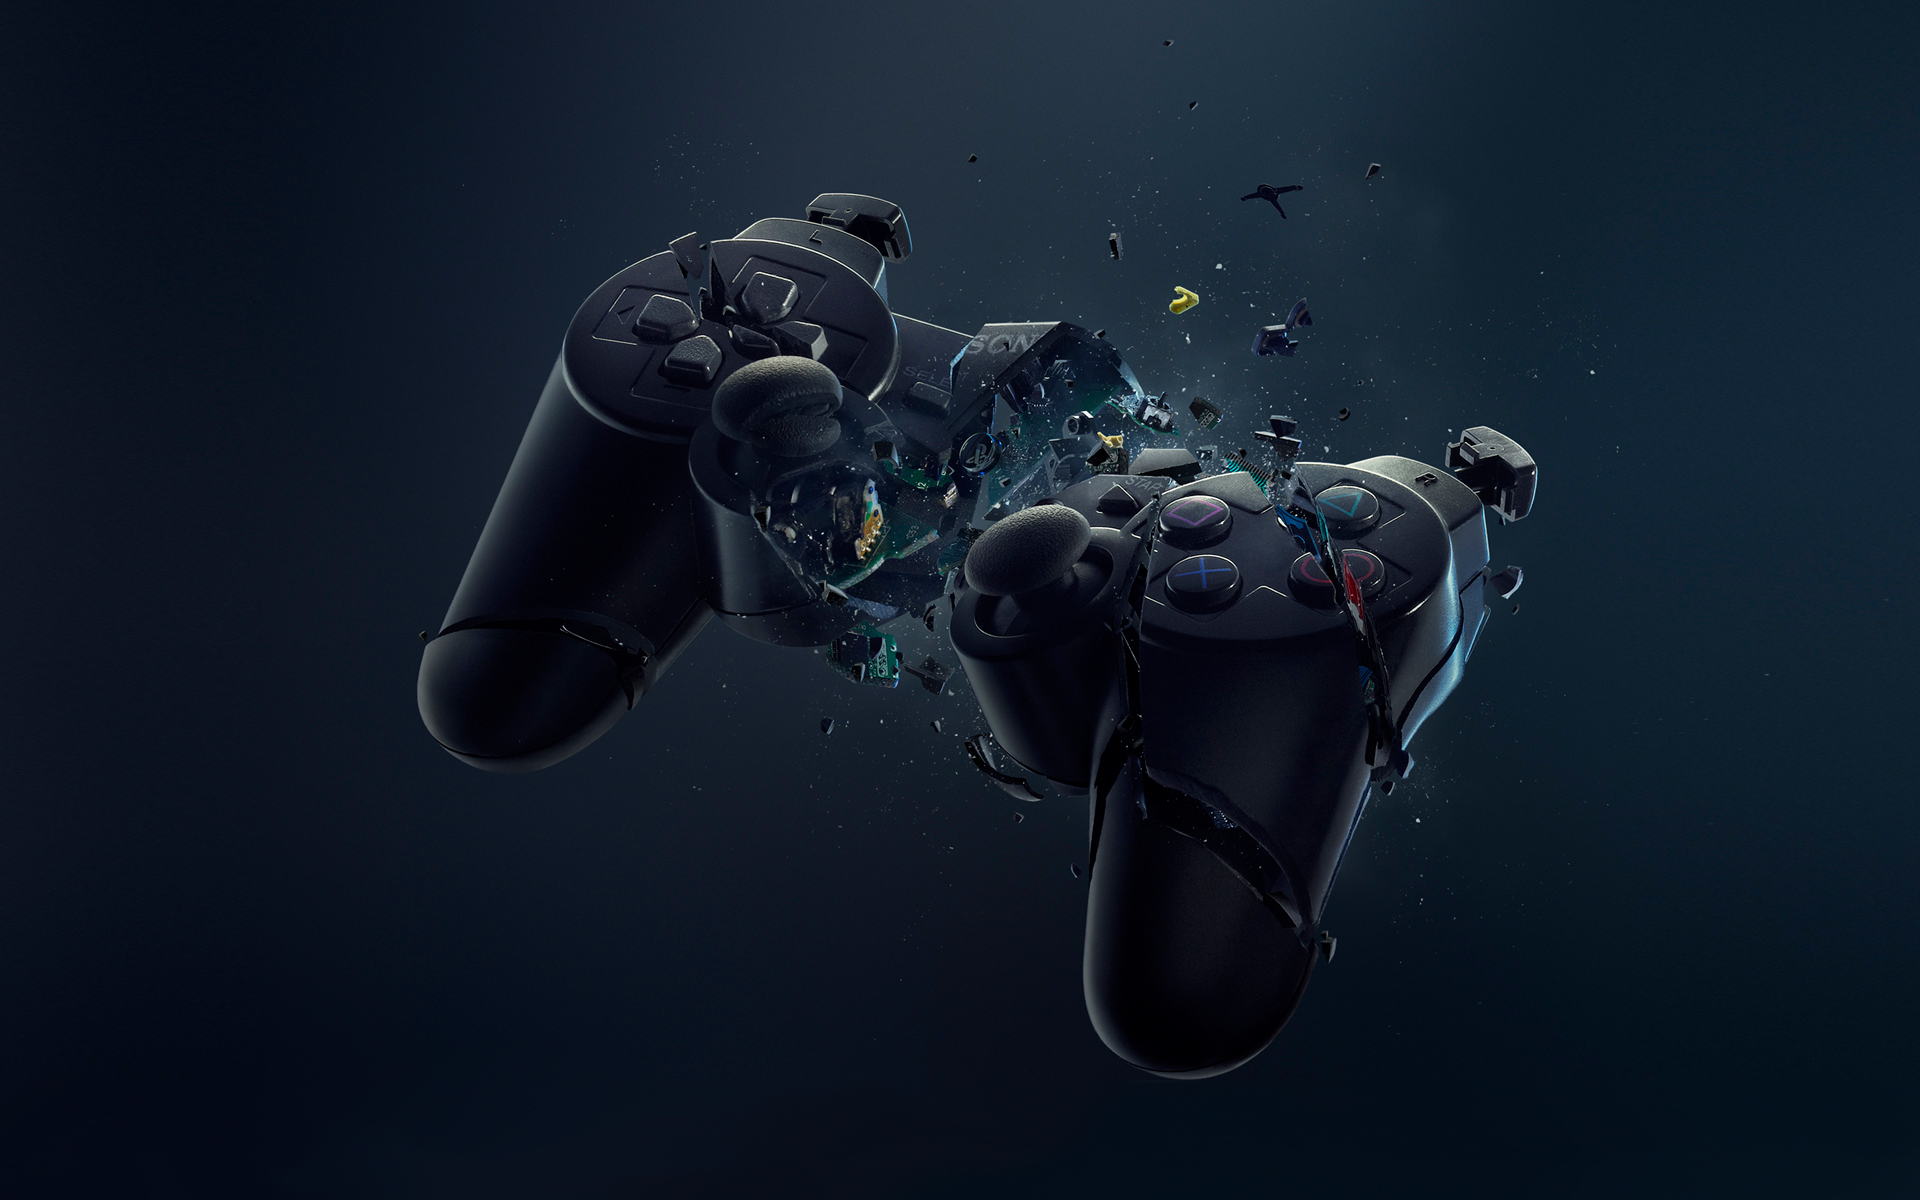 Ps3 Pad Explosion Google Background Themes